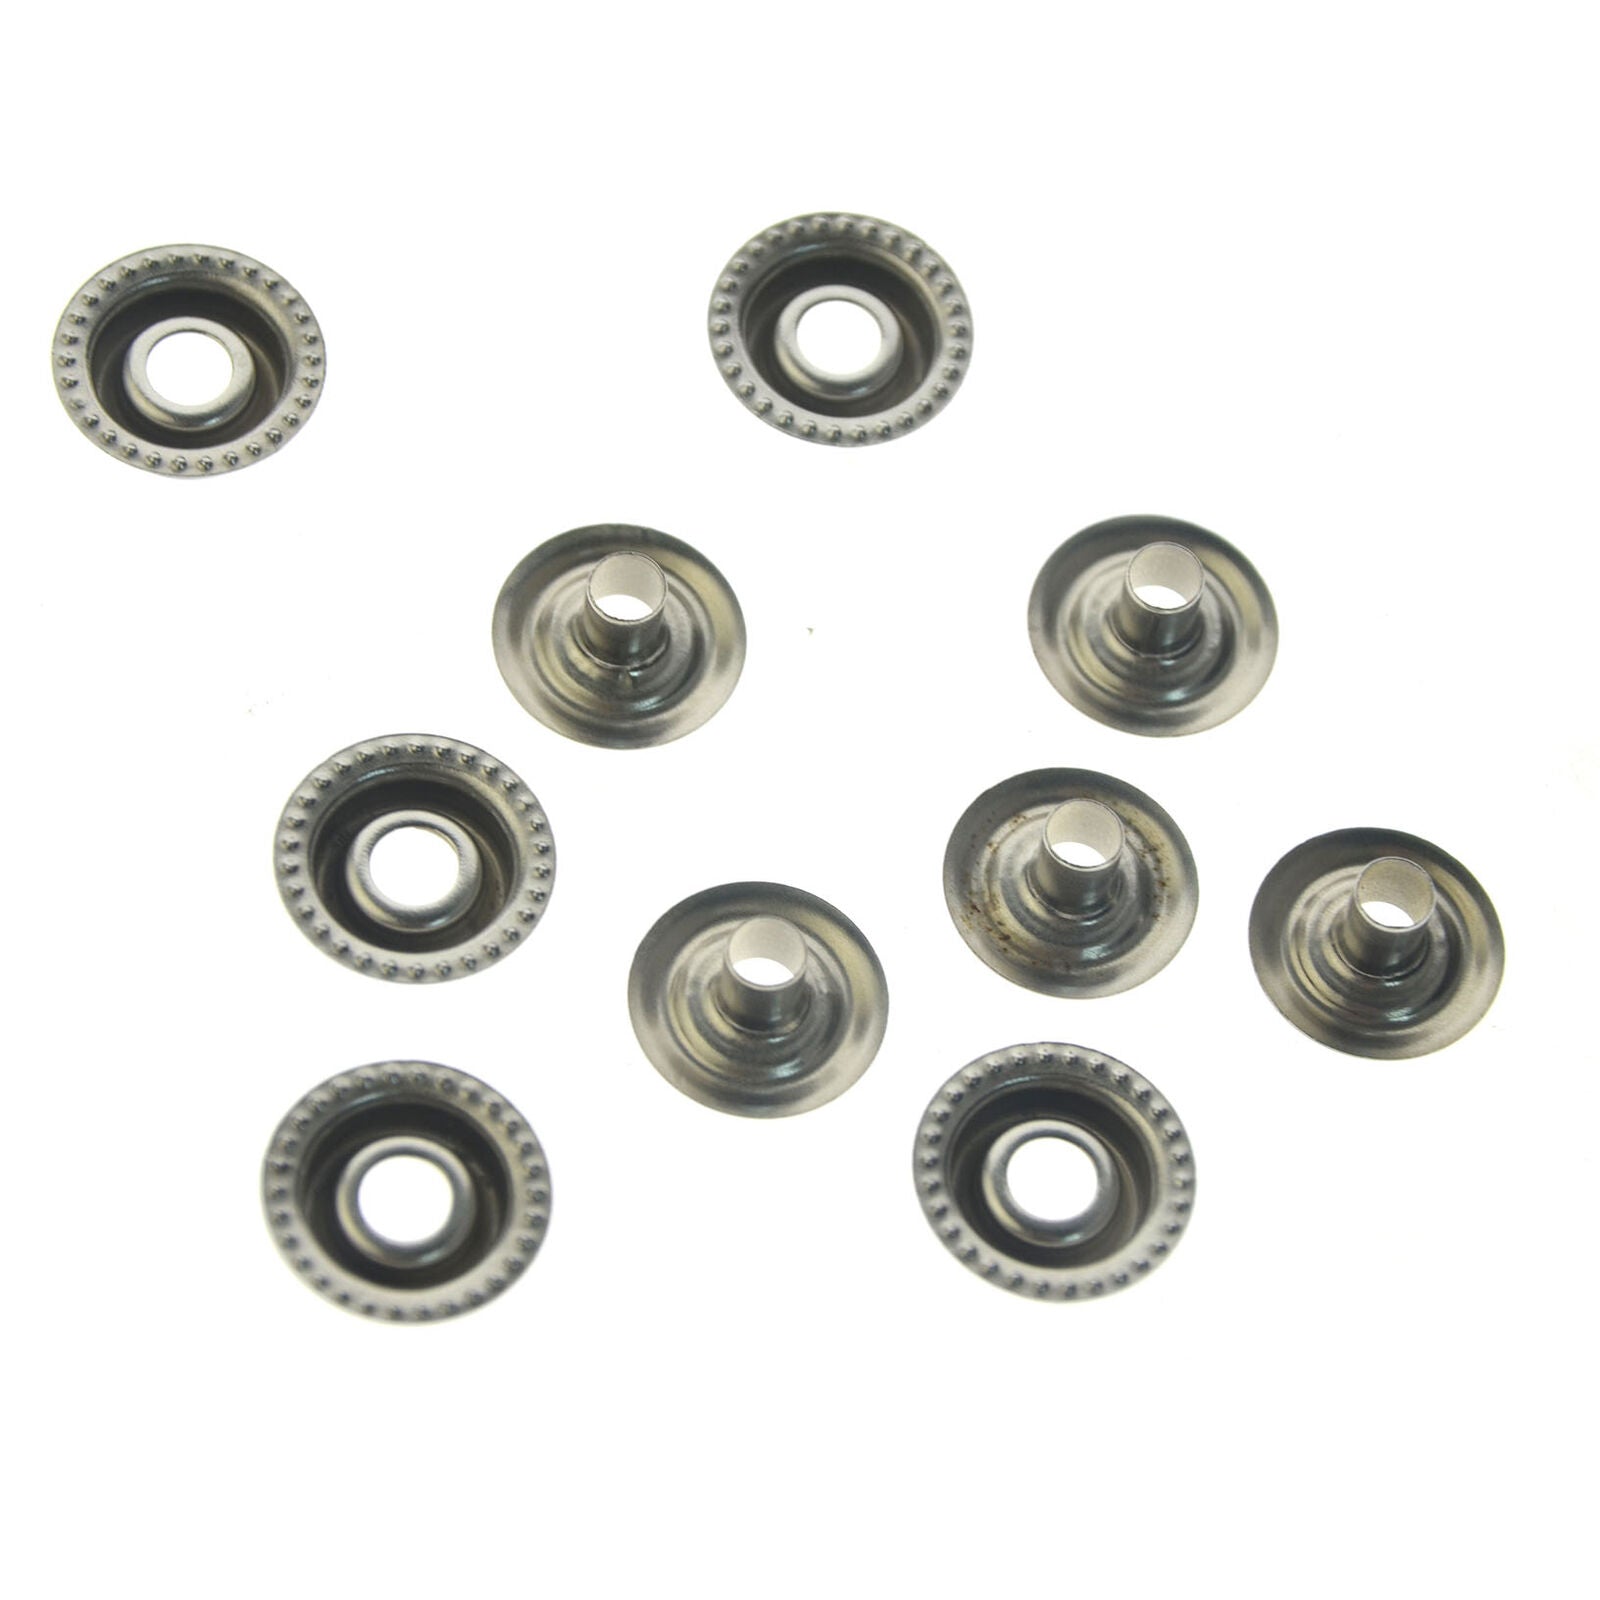 100pcs 15MM Stainless Steel Fastener Snap Stud Button DIY Leather Craft Tool Kit